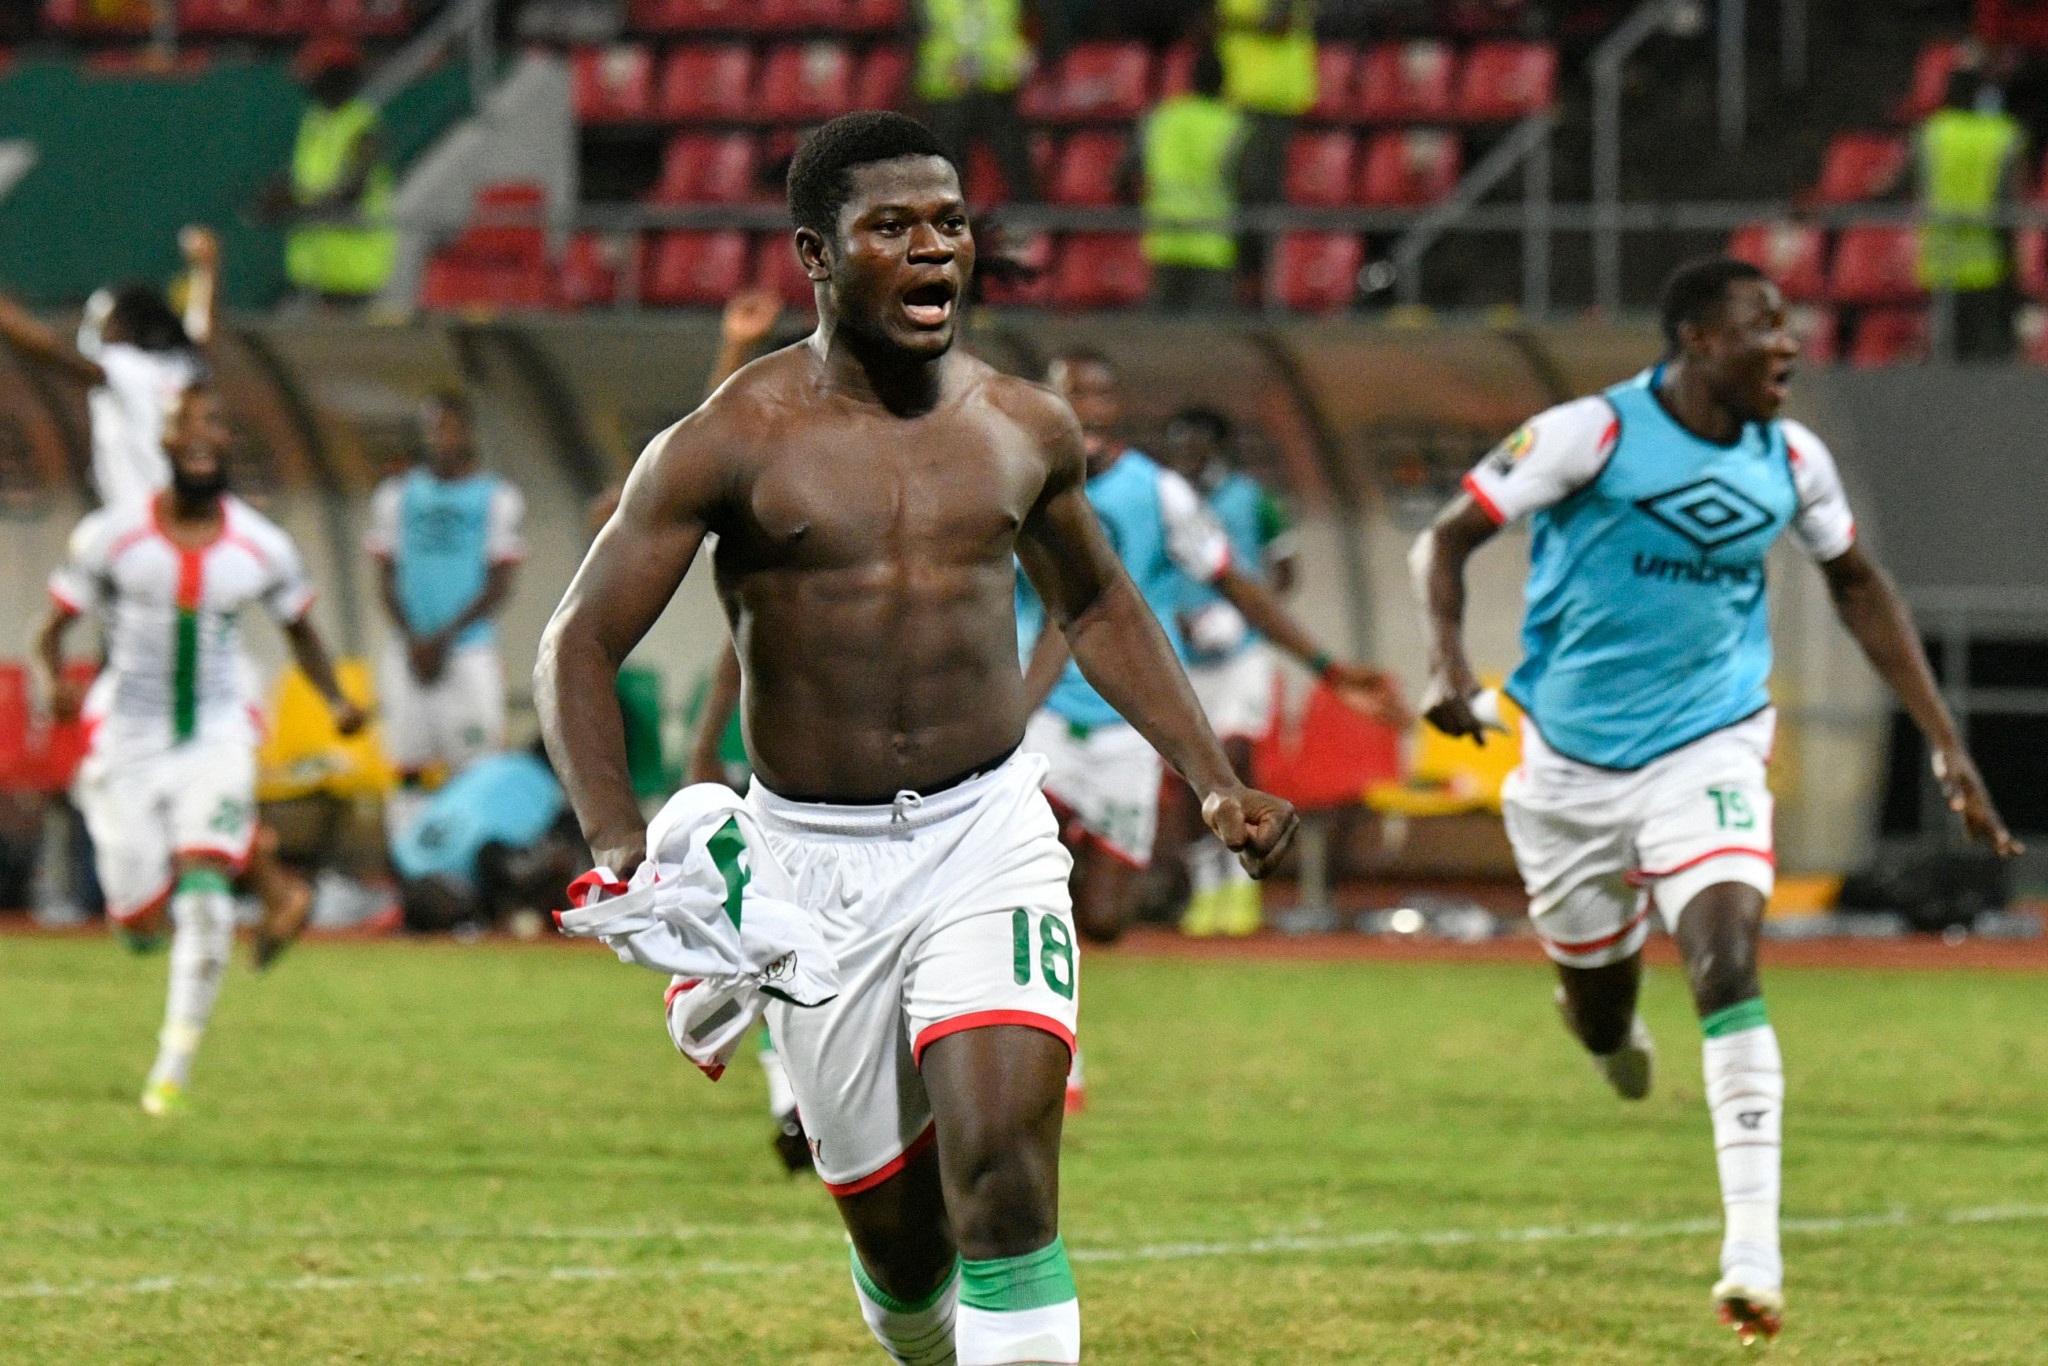 Burkina Faso win dramatic penalty shoot-out to reach Africa Cup of Nations quarter-finals